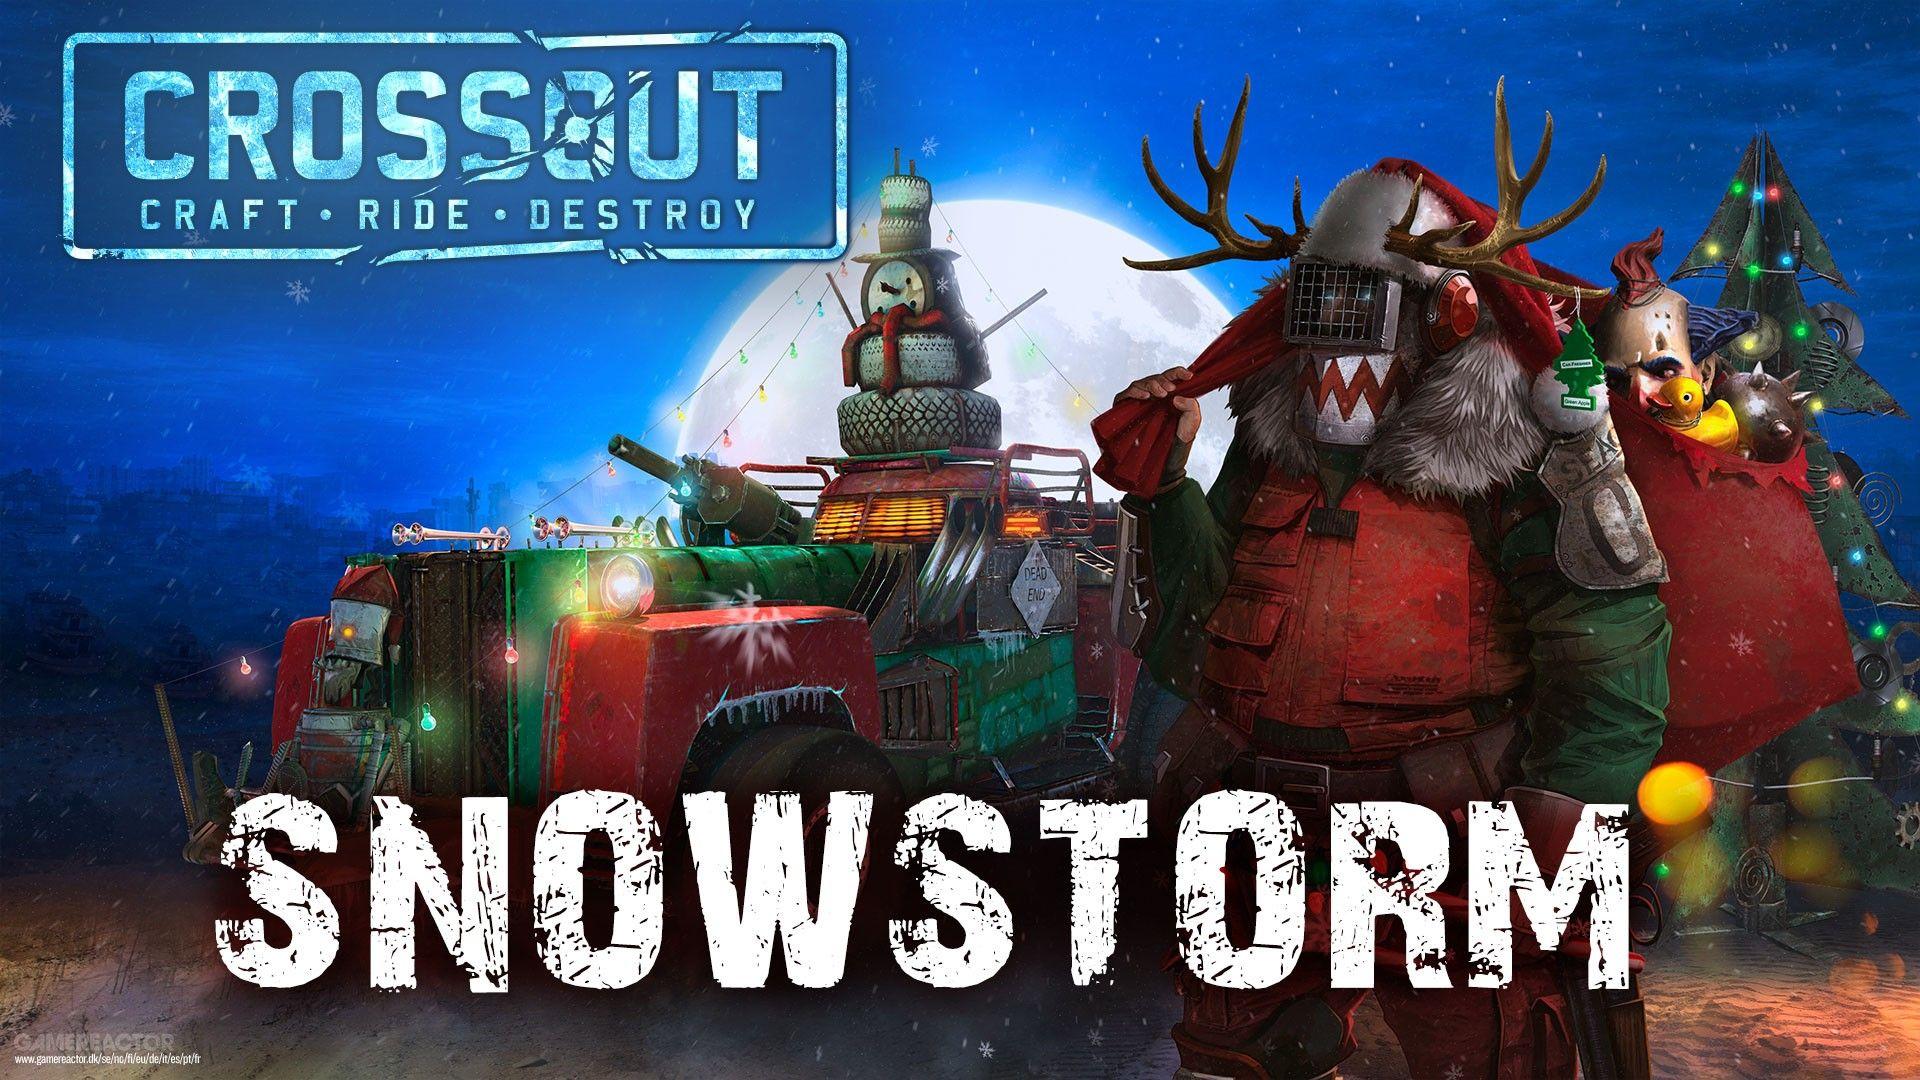 Crossout gets into the holiday spirit